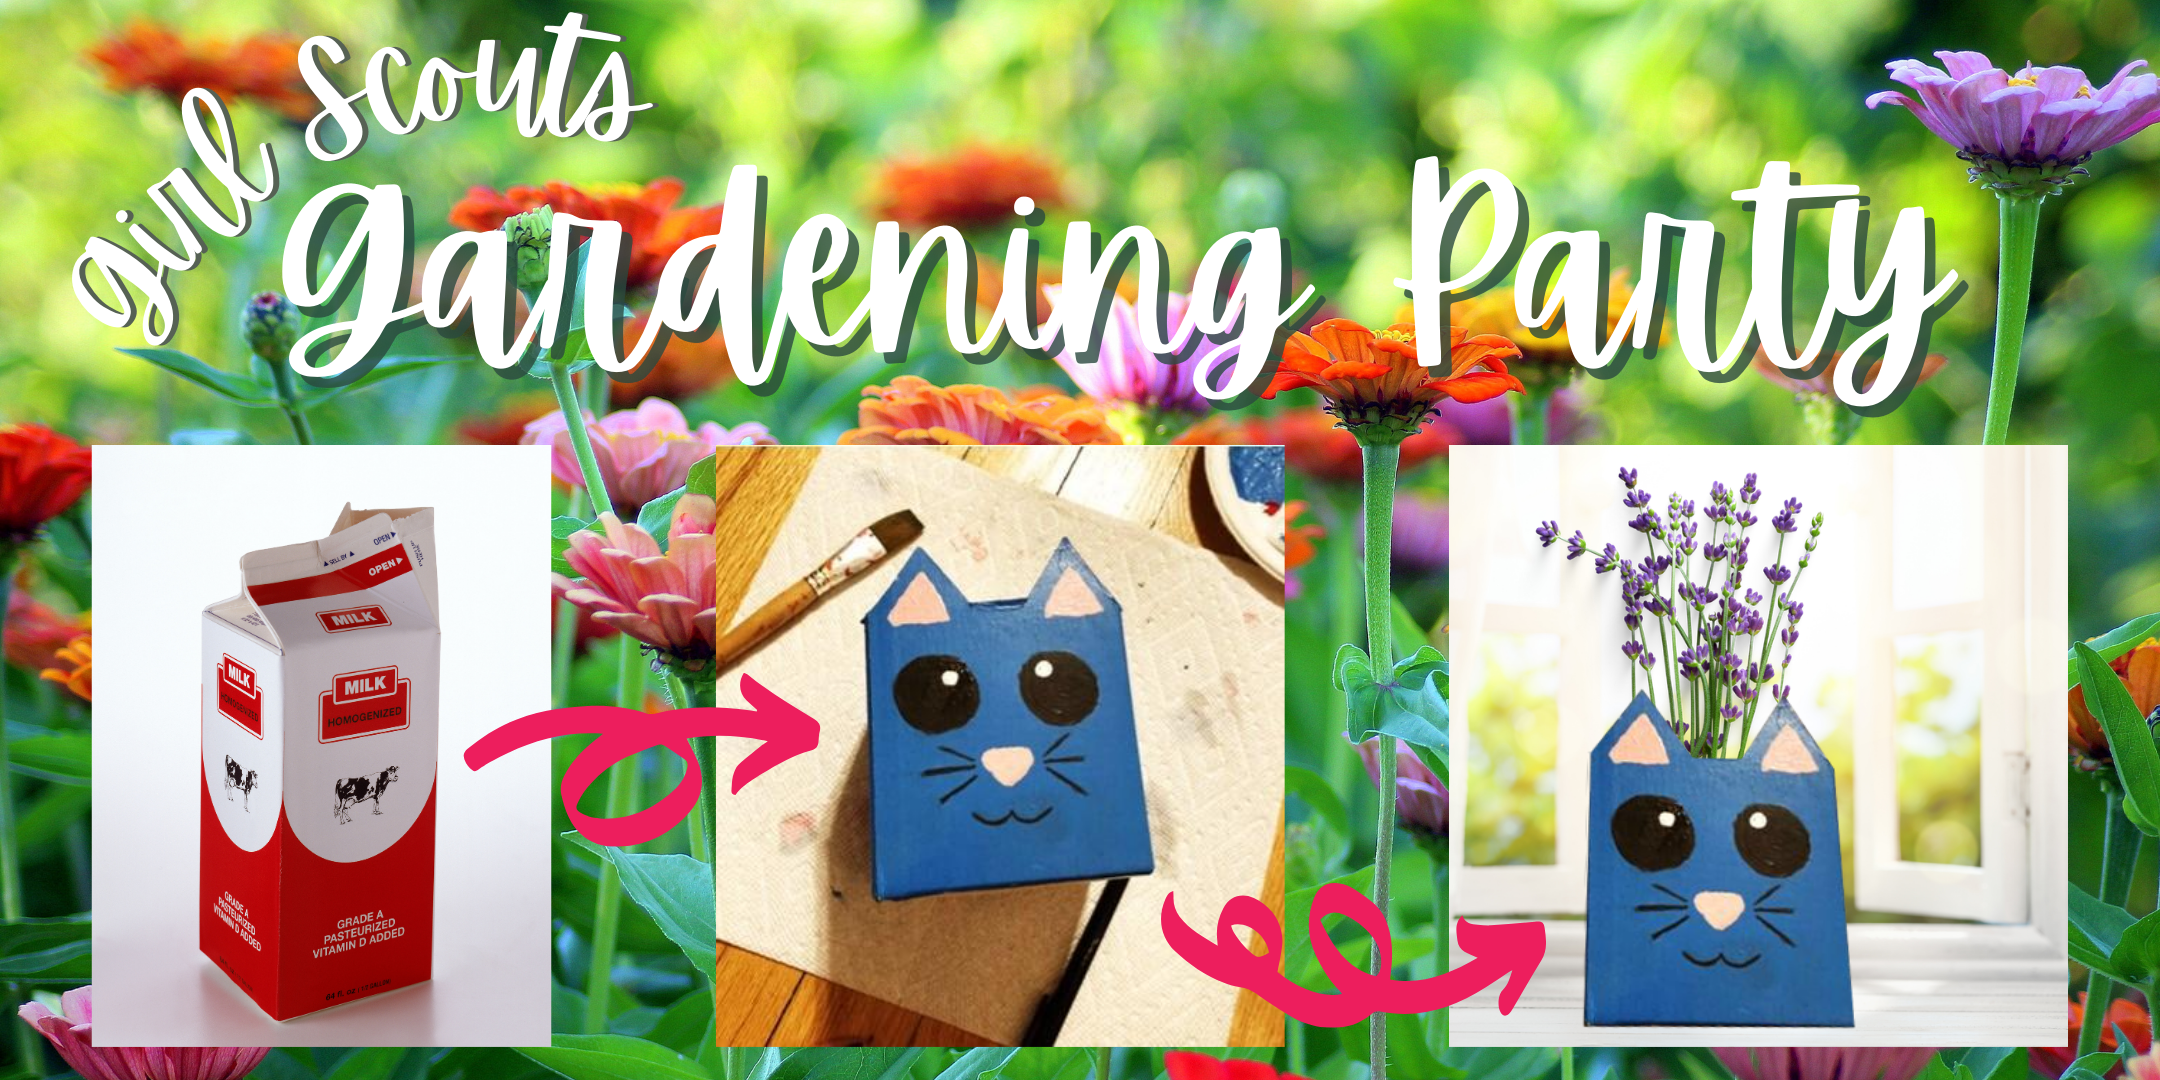 Girl Scouts Gardening Party image